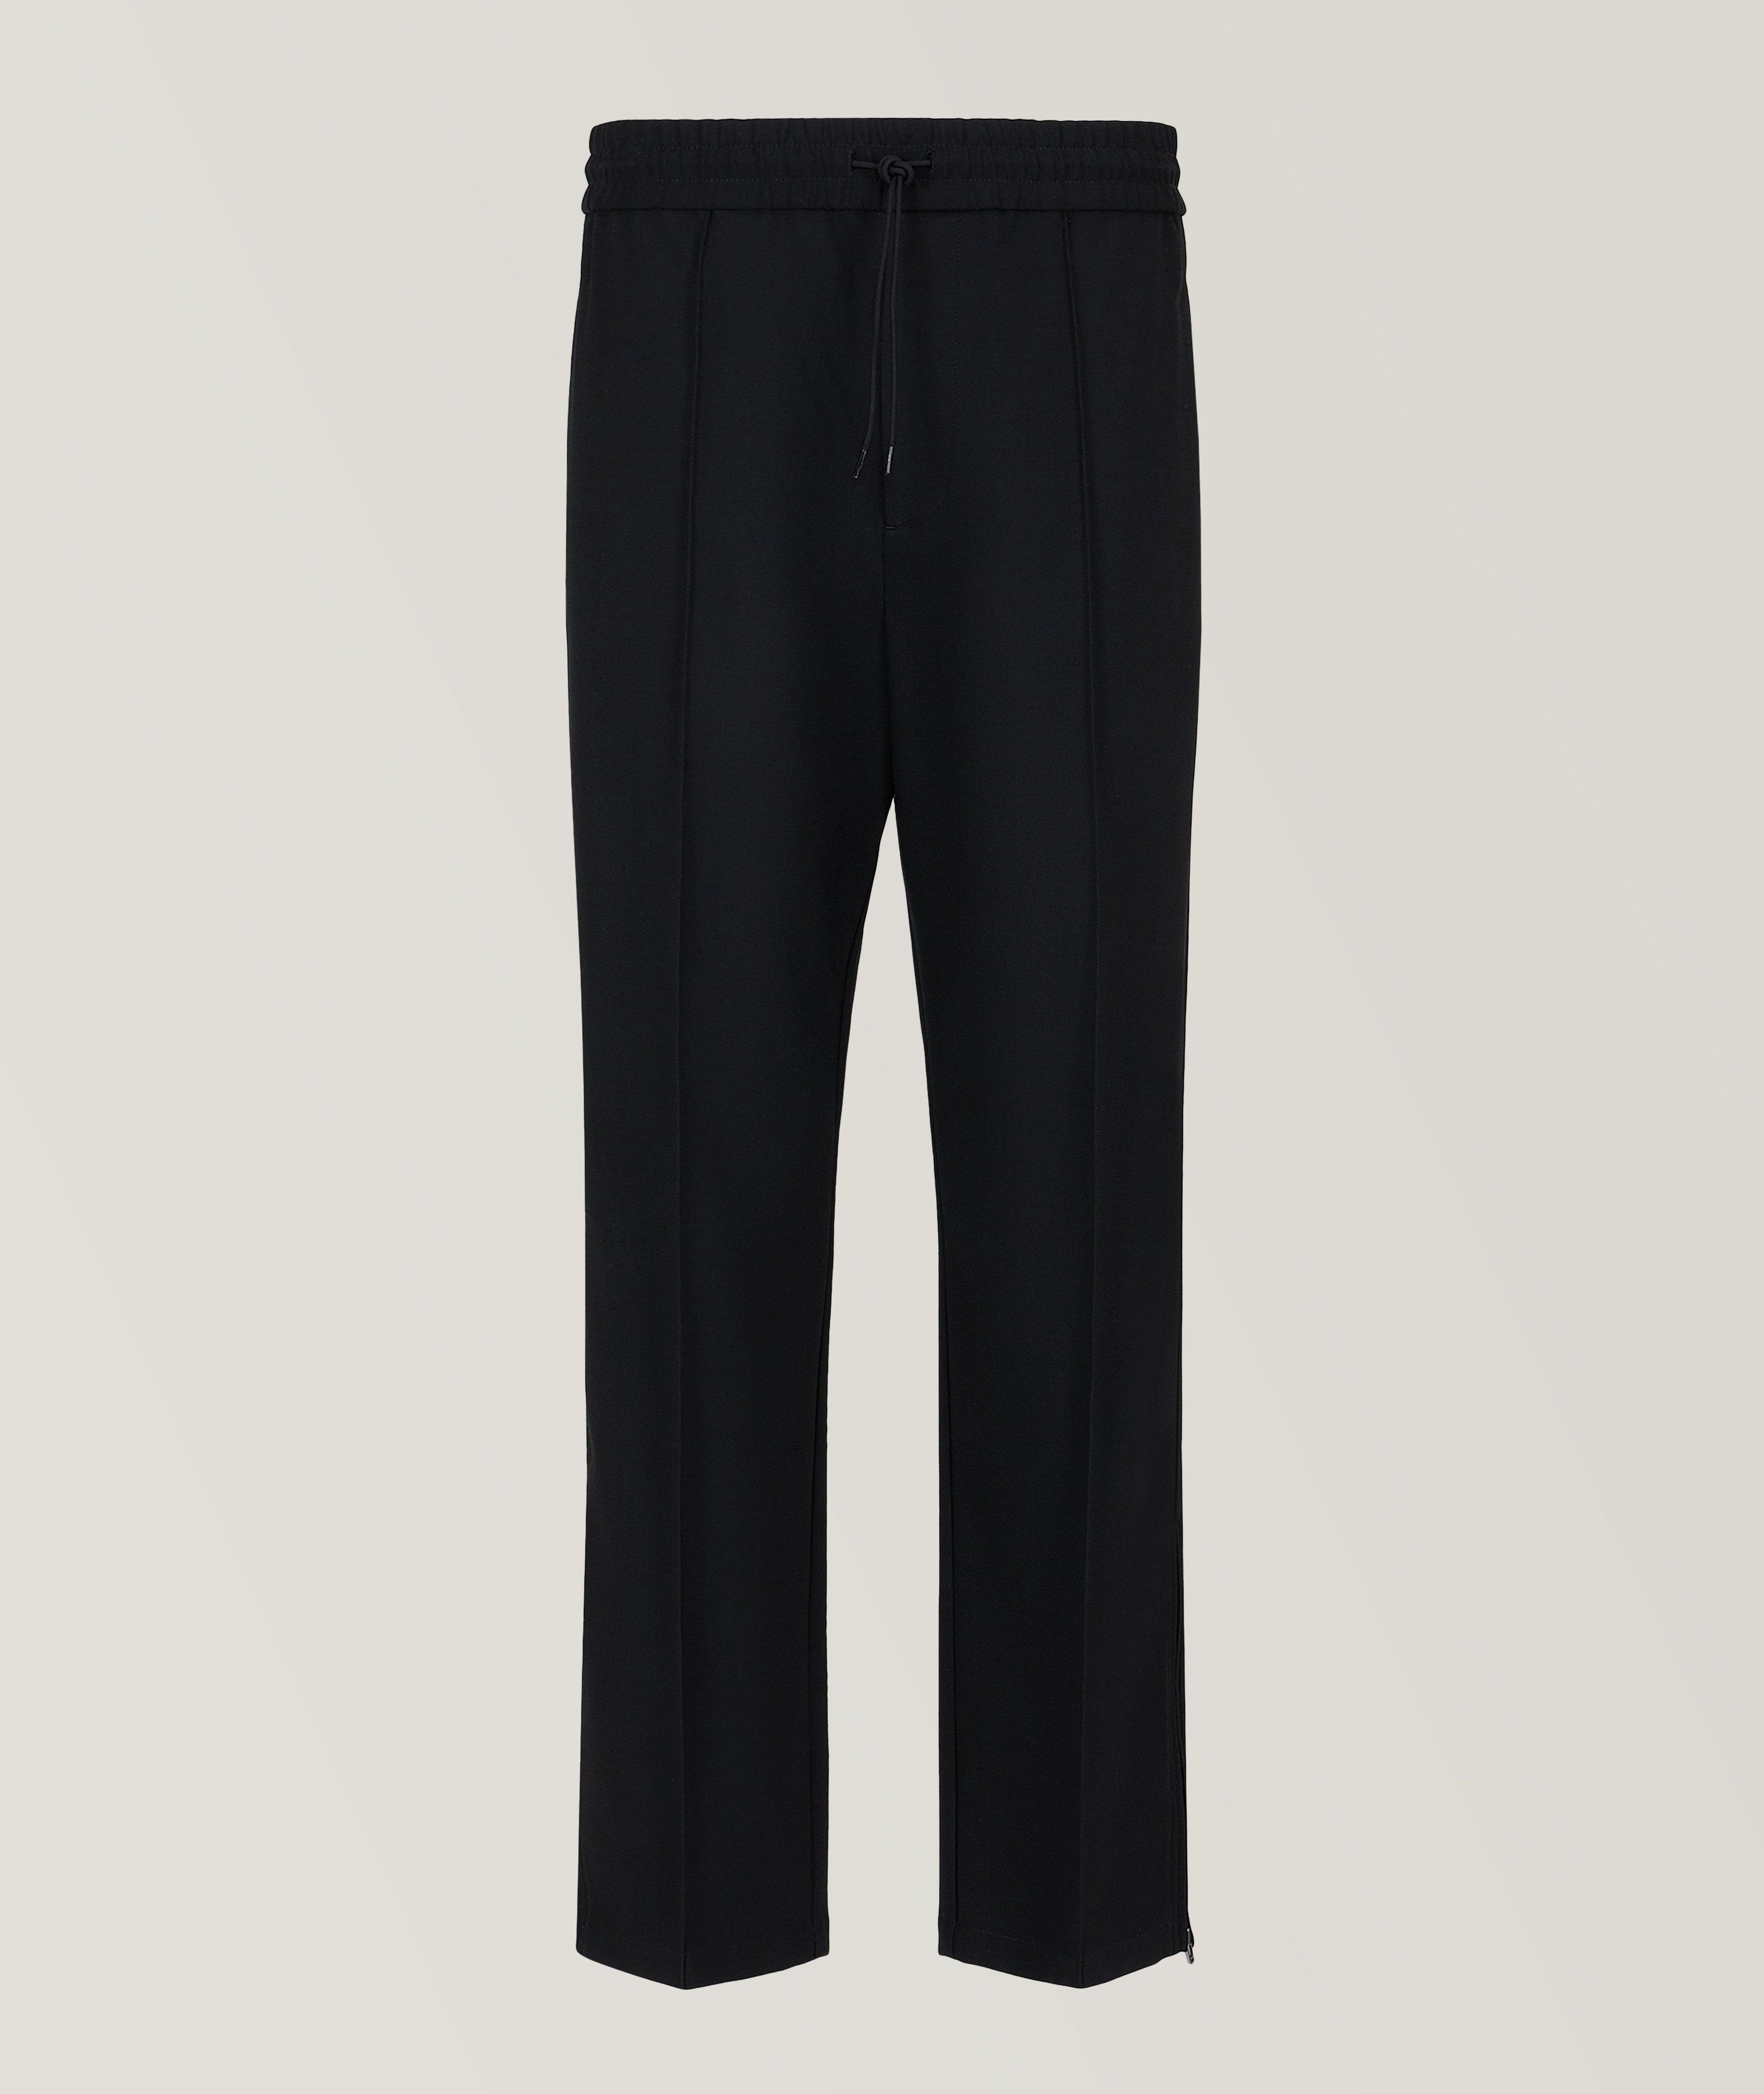 Piping Wool-Blend Trousers image 0